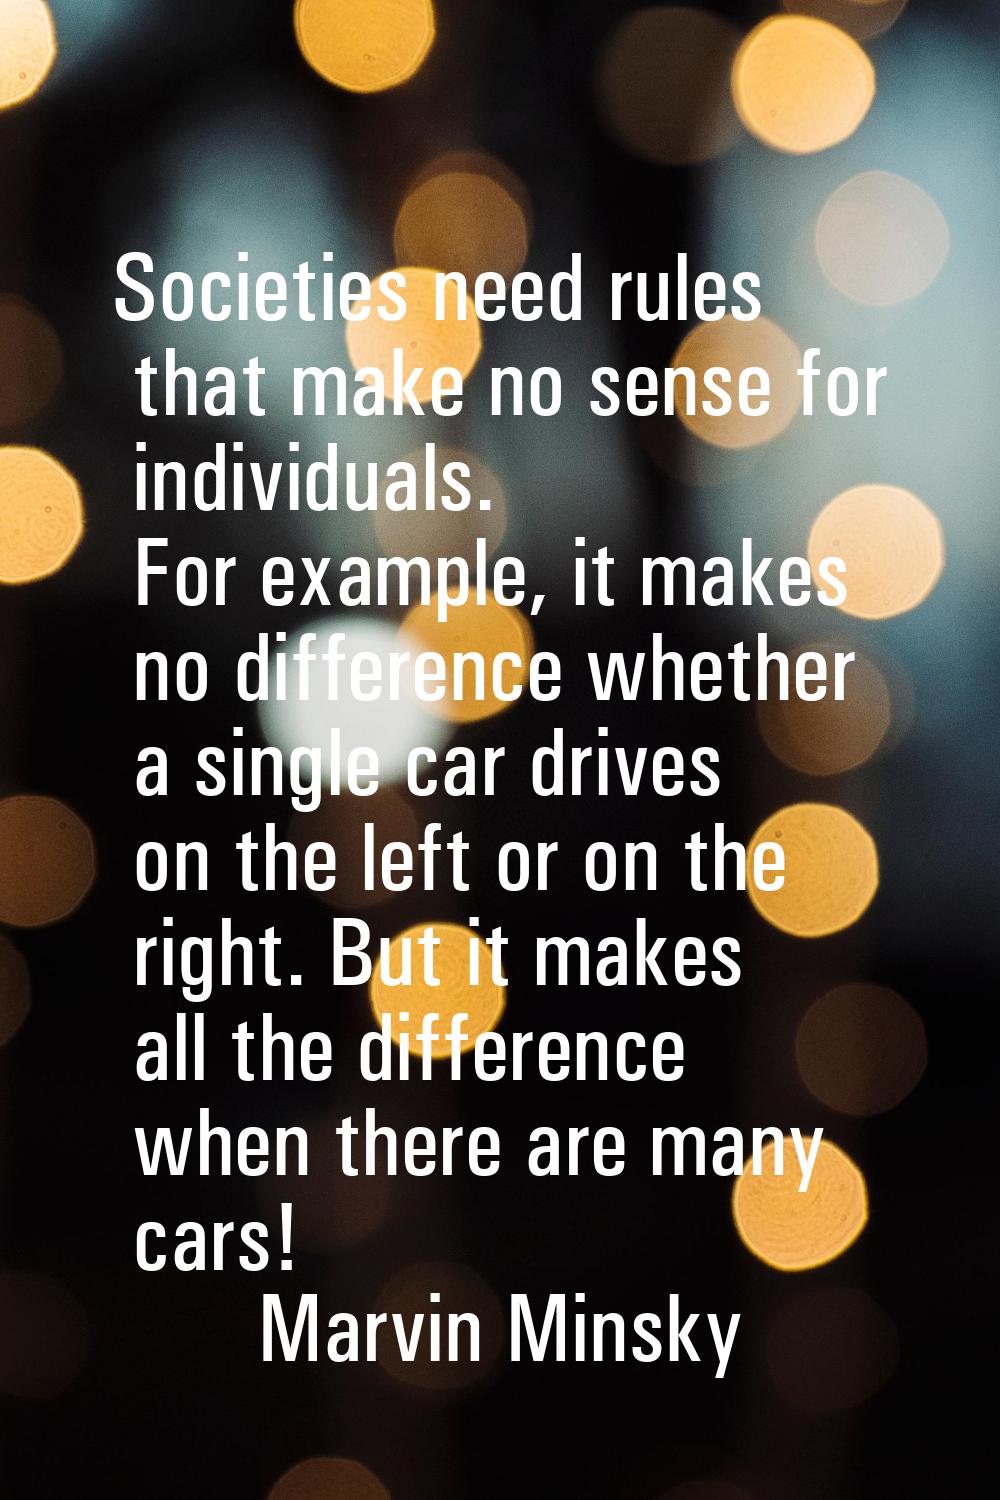 Societies need rules that make no sense for individuals. For example, it makes no difference whethe